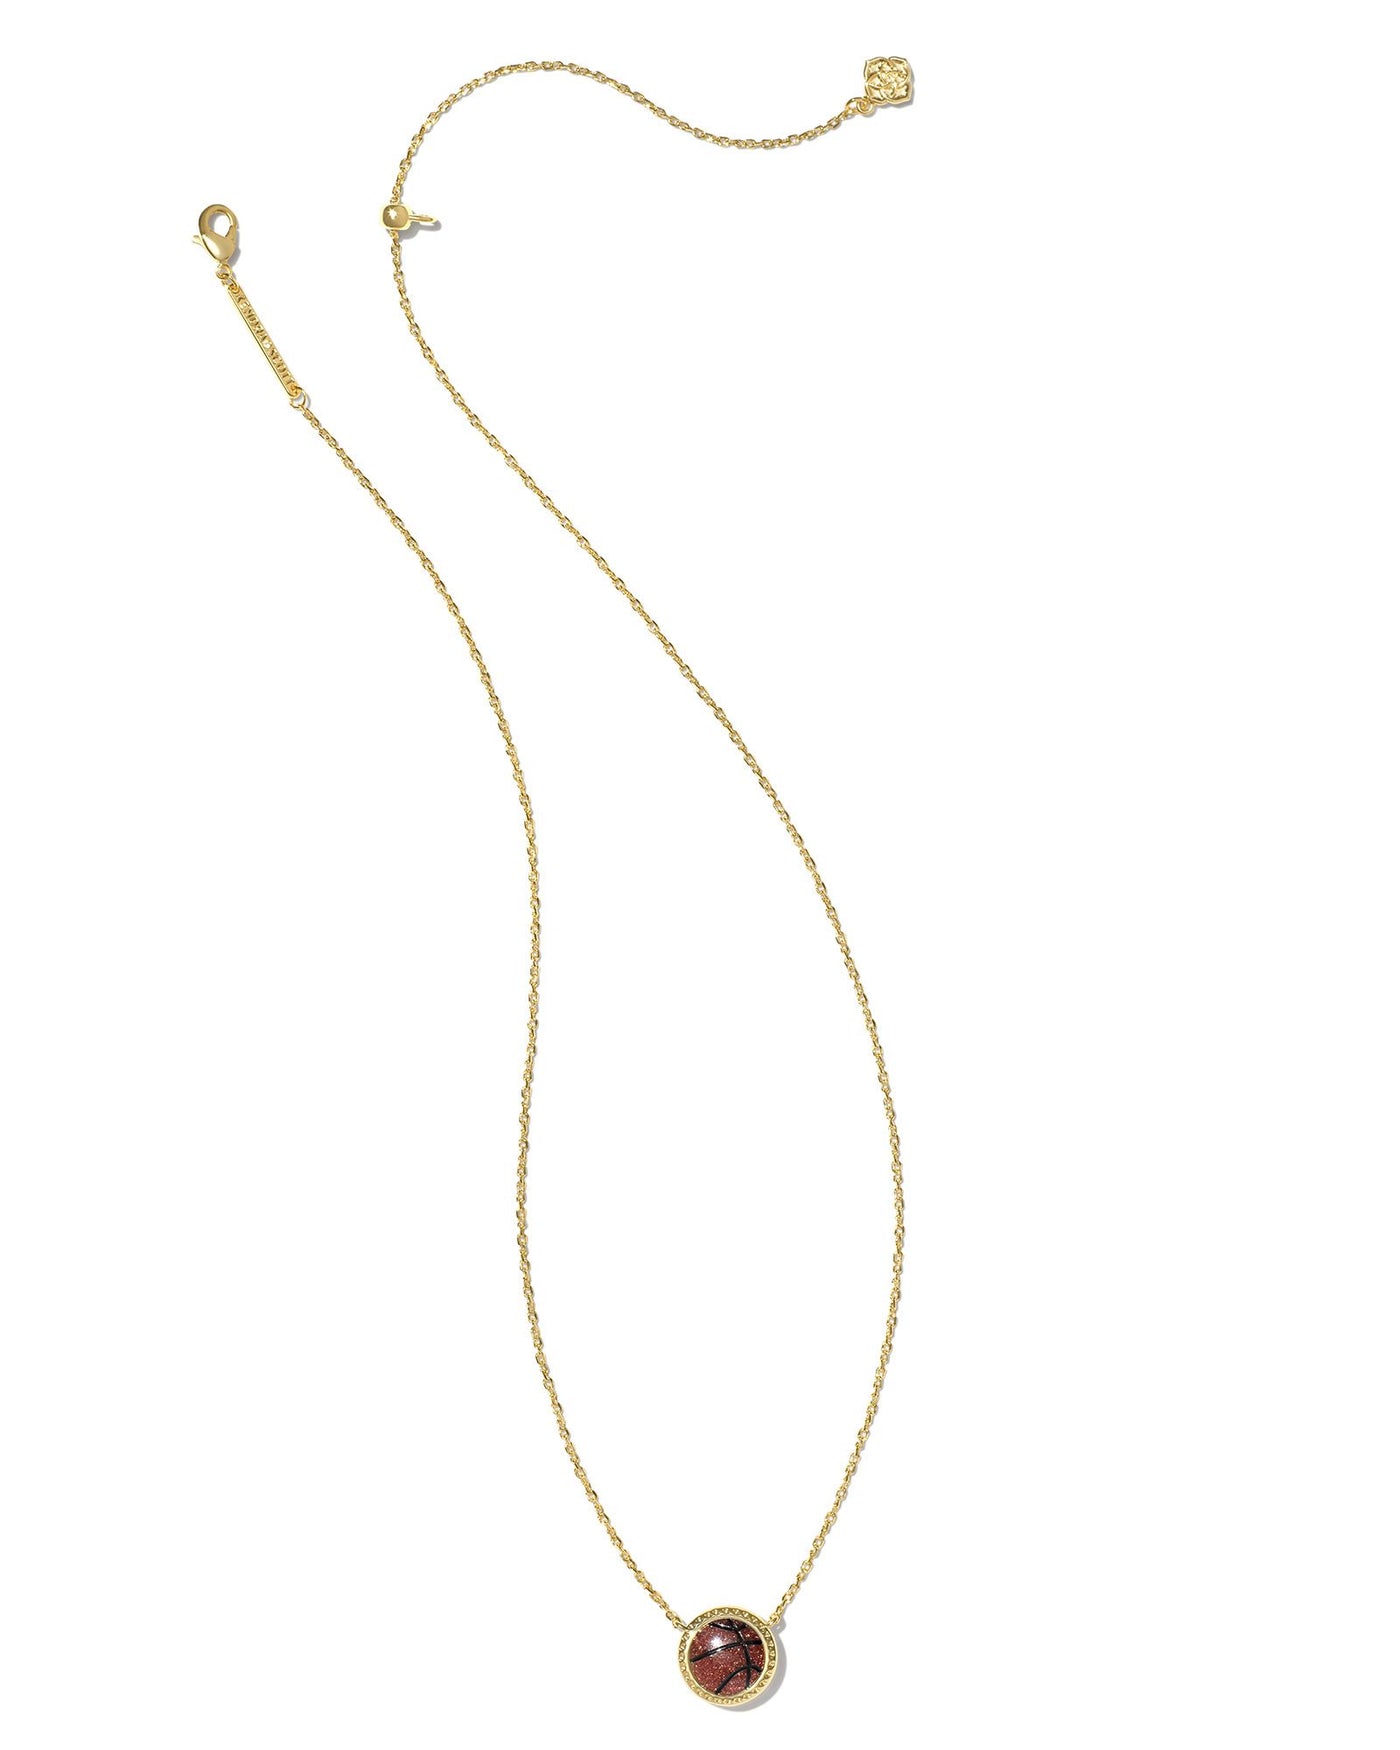 Kendra Scott Basketball Pendant Necklace in Gold on white background full view.